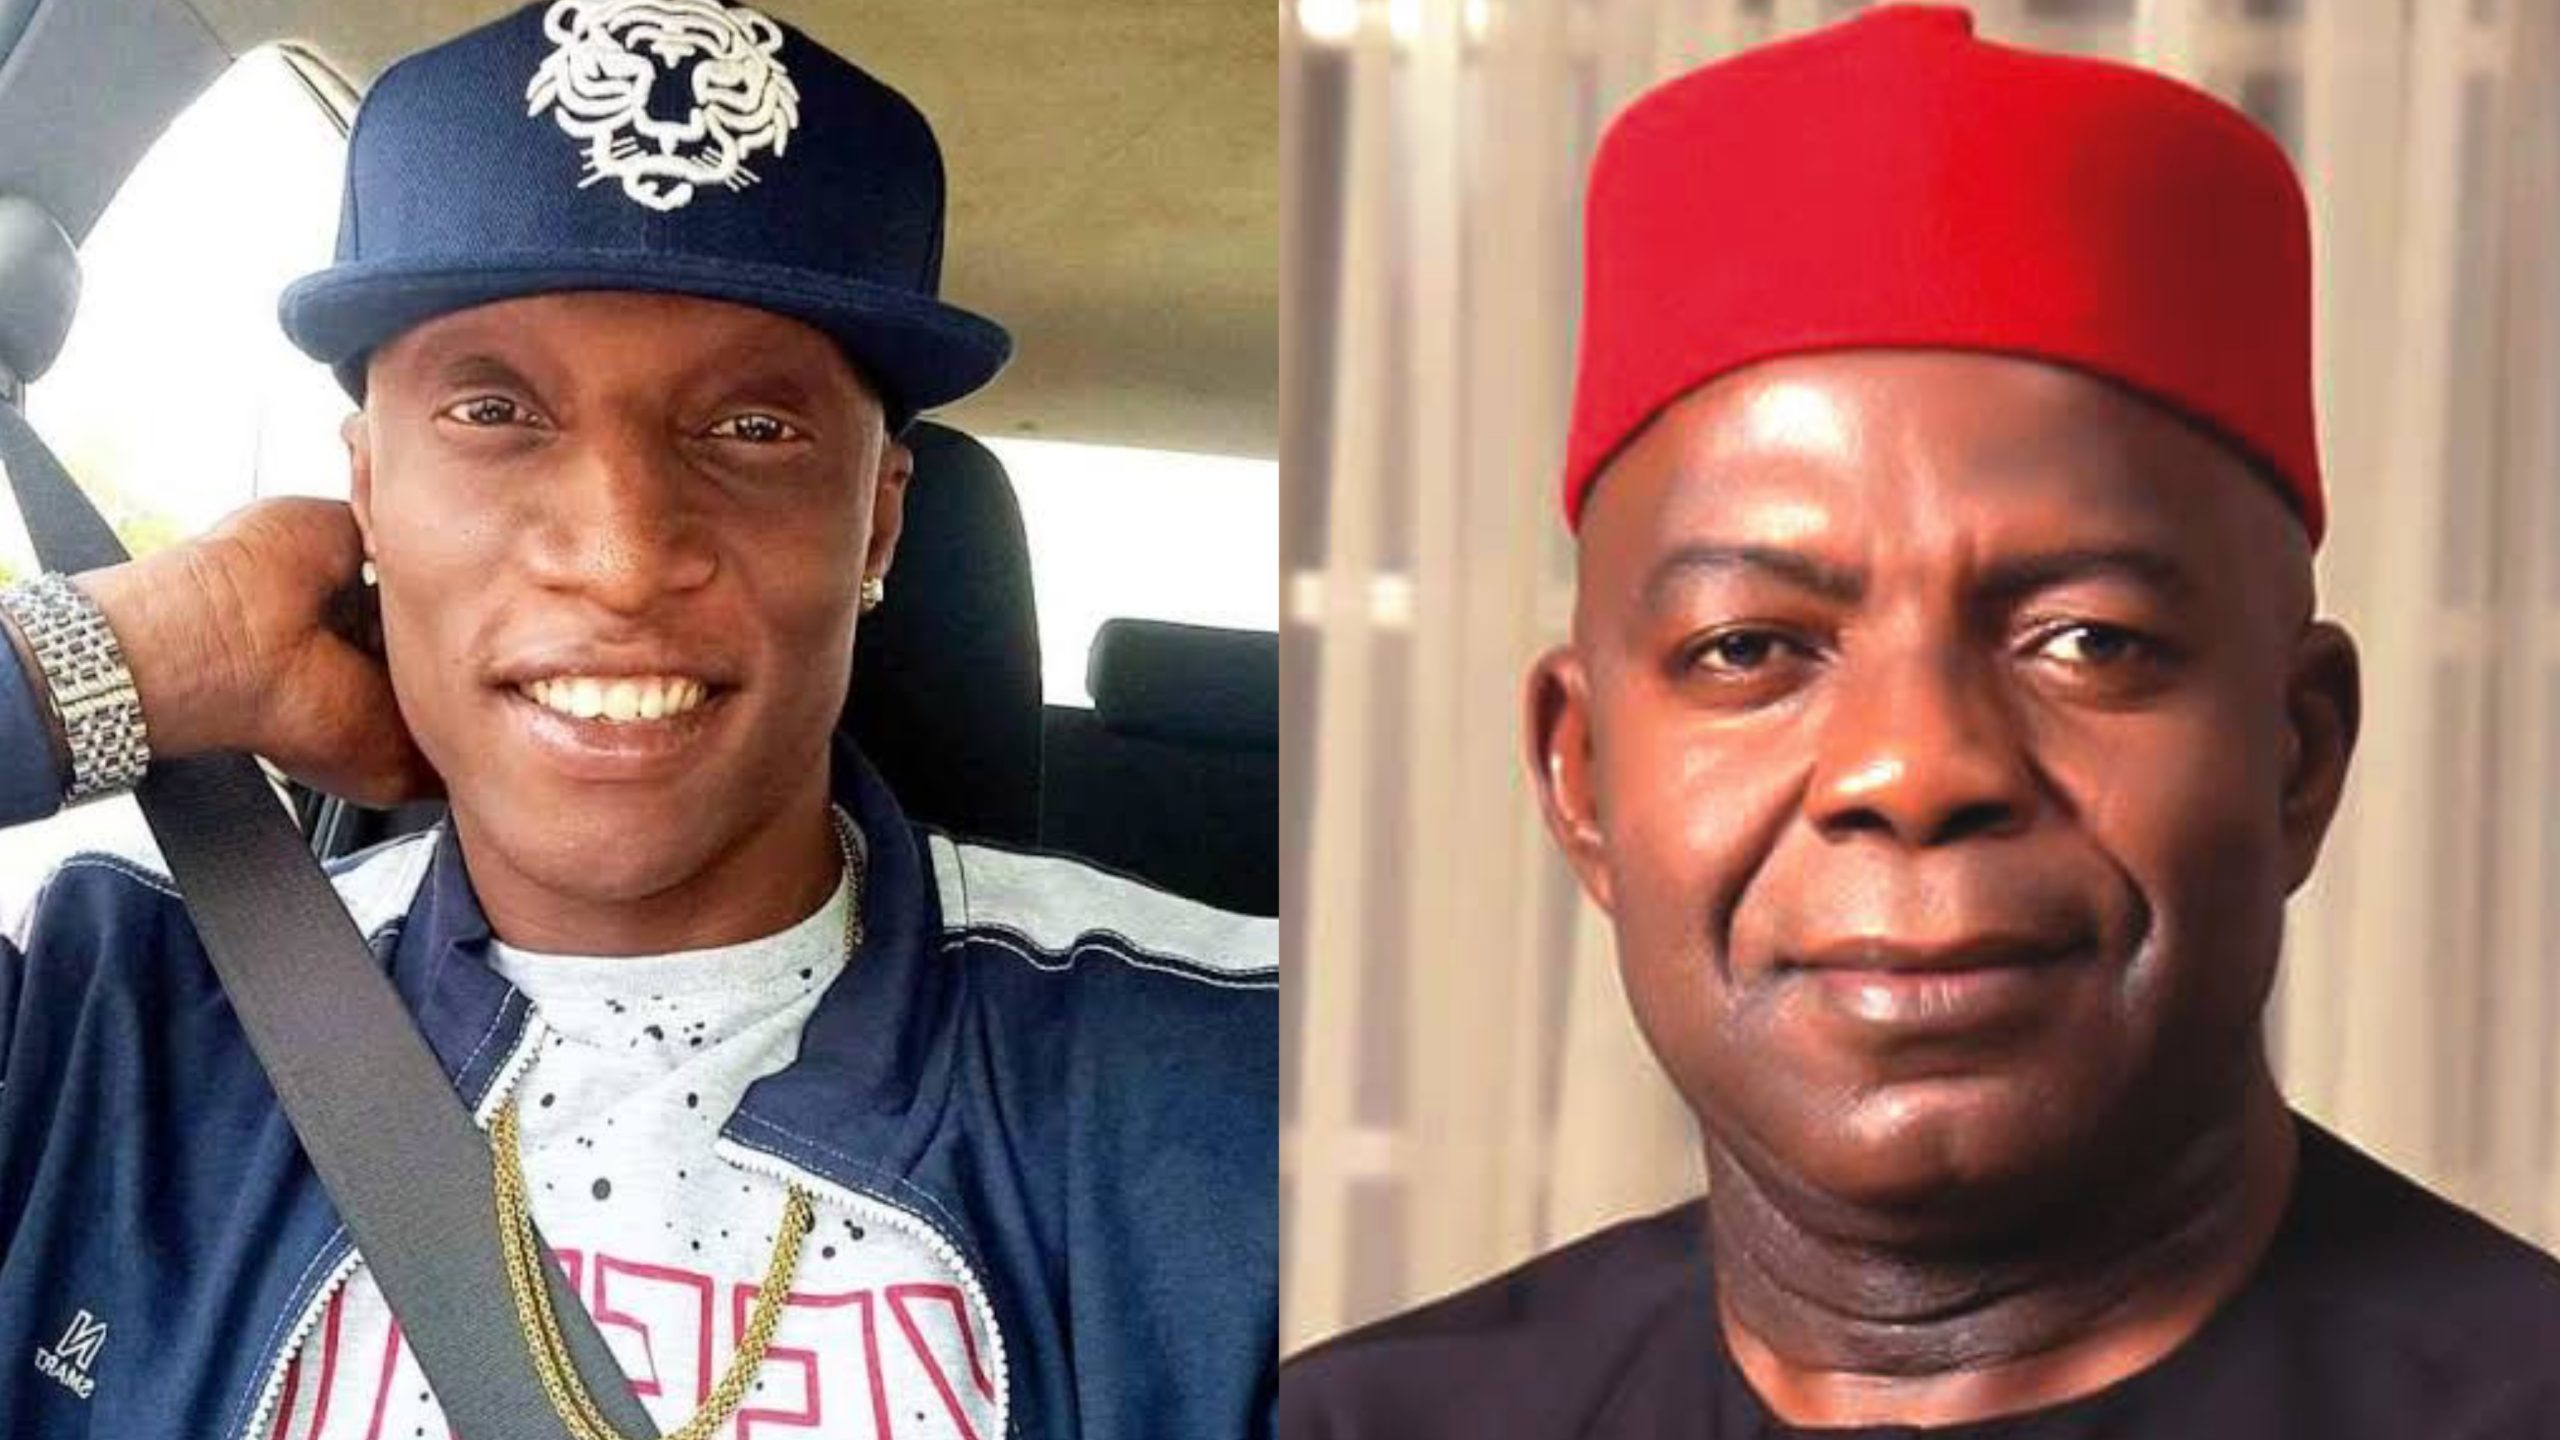 Rapper N6 has plans to ‘flex’ Governor Alex Otti as he visits Abia